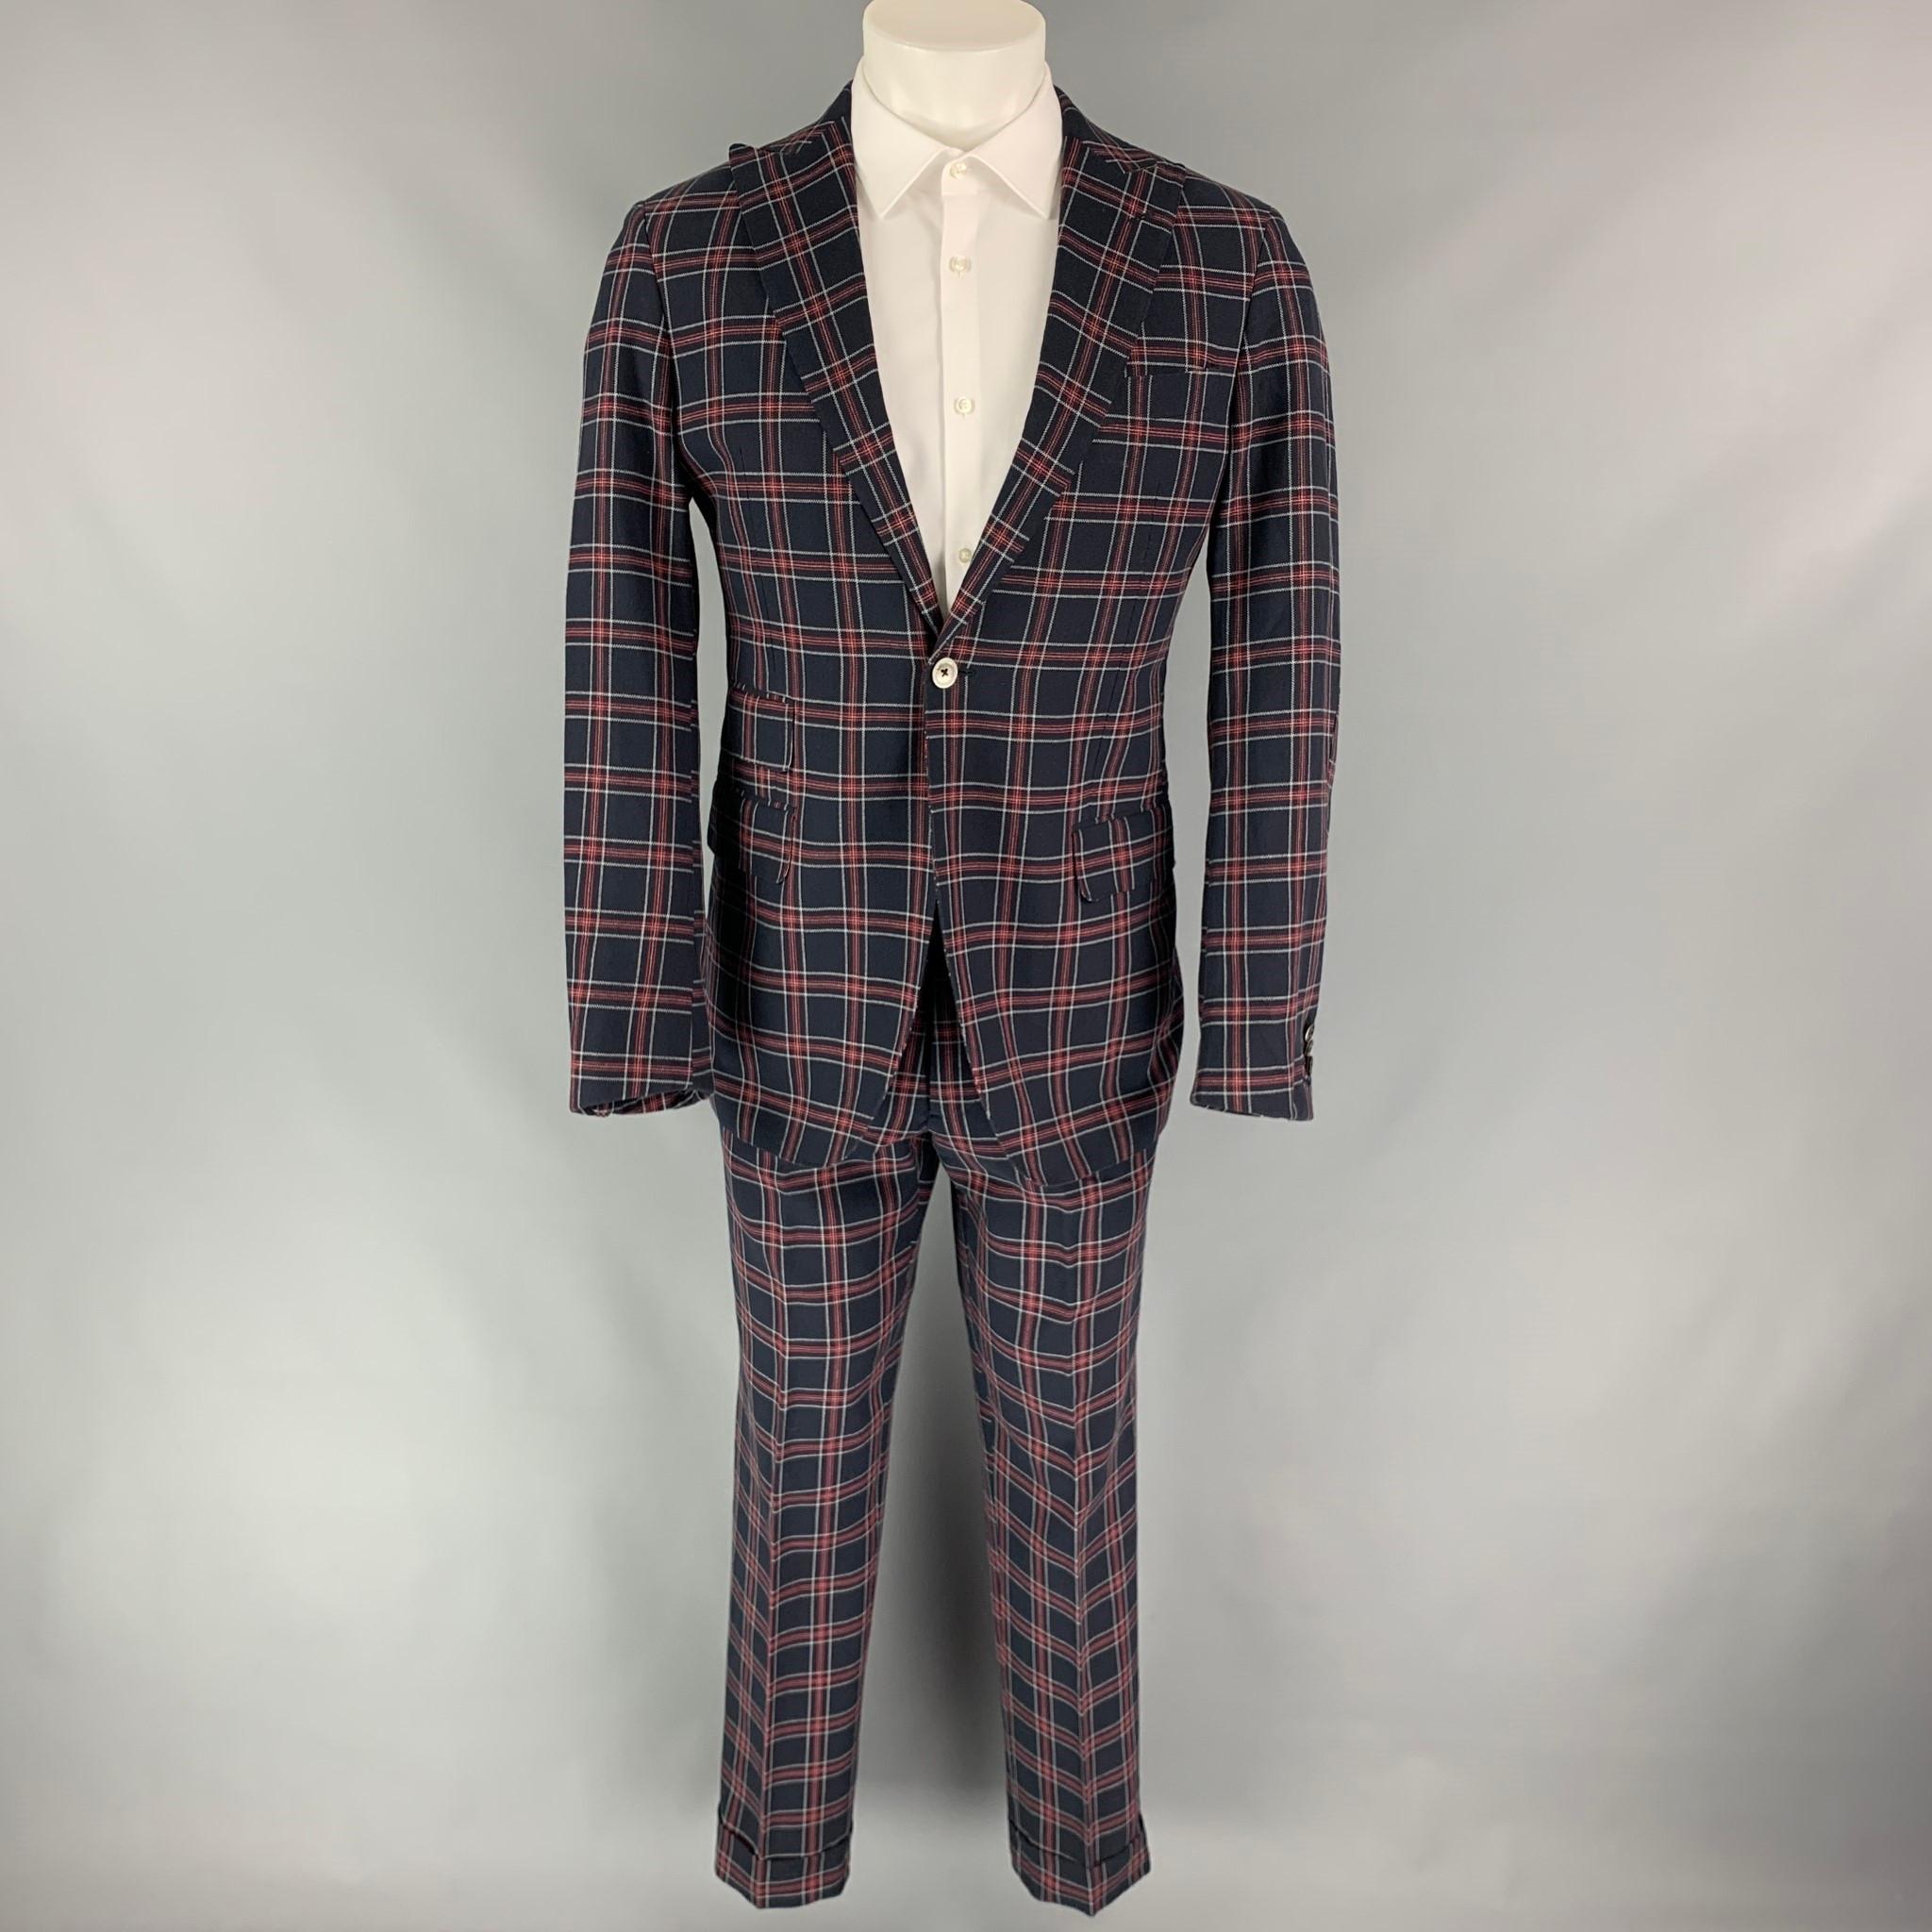 MICHAEL BASTIAN suit comes in a navy & red plaid cotton with a full liner and includes a single breasted, single button sport coat with a peak lapel and matching flat front trousers. Made in Italy.

Very Good Pre-Owned Condition.
Marked: